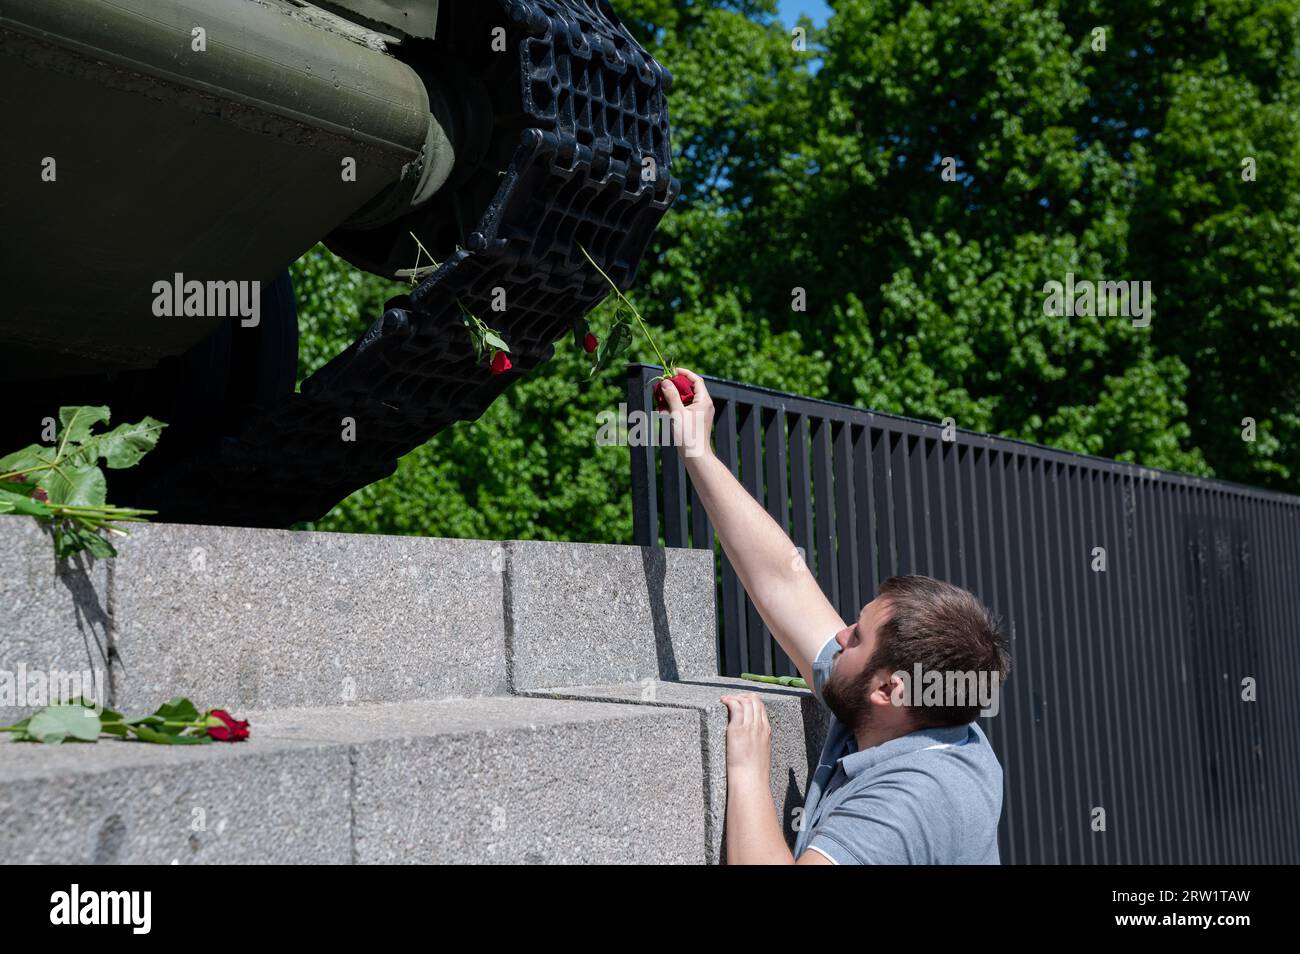 08.05.2022, Germany, Berlin, Berlin - Europe - A man inserts a red rose into the chain of a T-34 tank at the Soviet Memorial along the Strasse des 17. Stock Photo